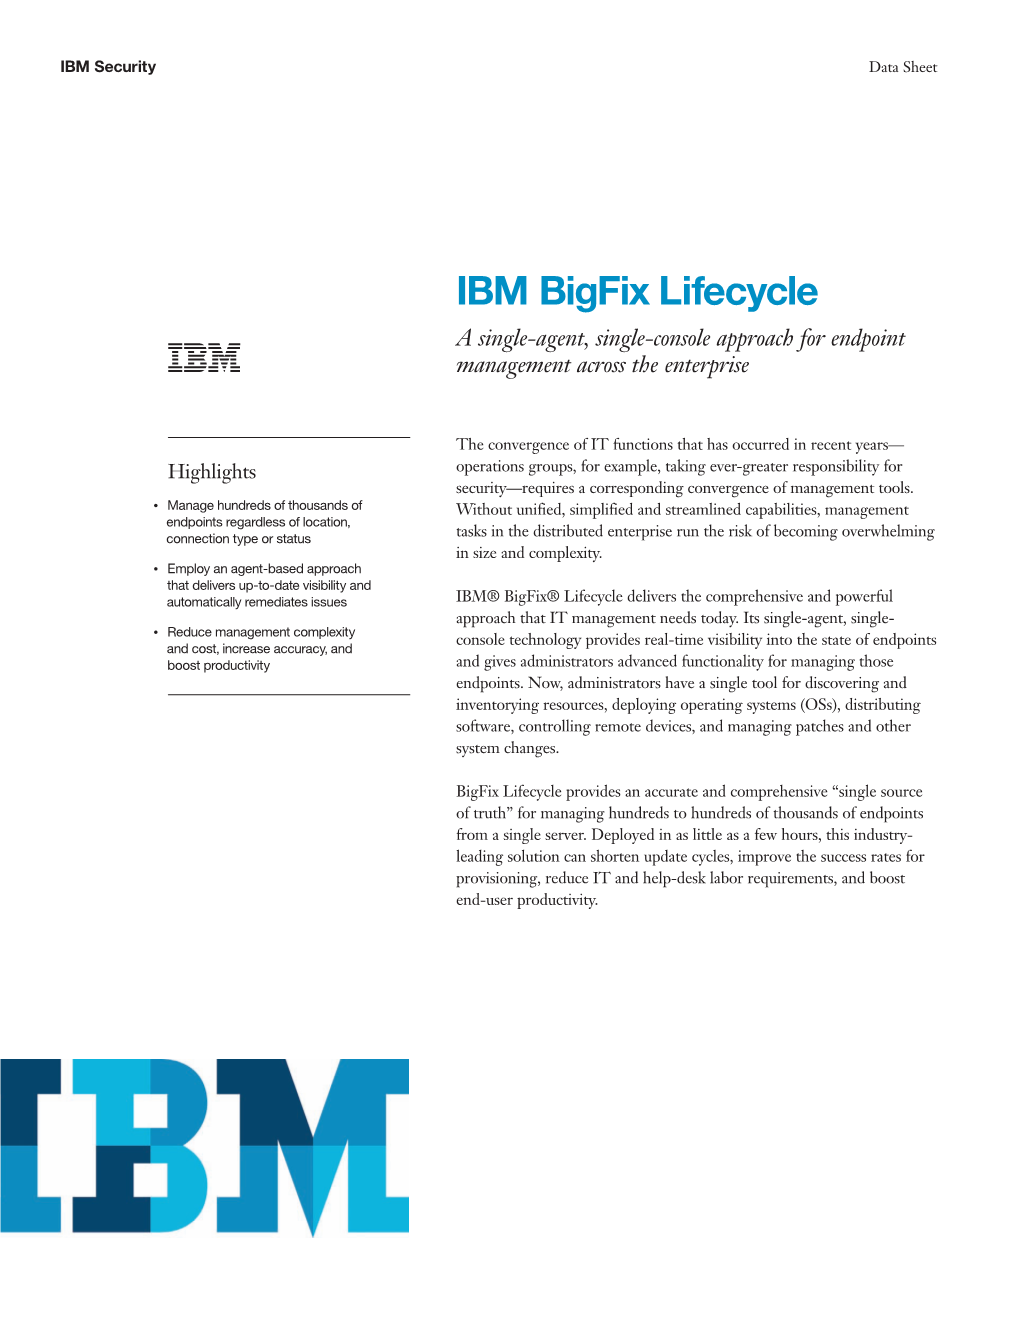 IBM Bigfix Lifecycle a Single-Agent, Single-Console Approach for Endpoint Management Across the Enterprise